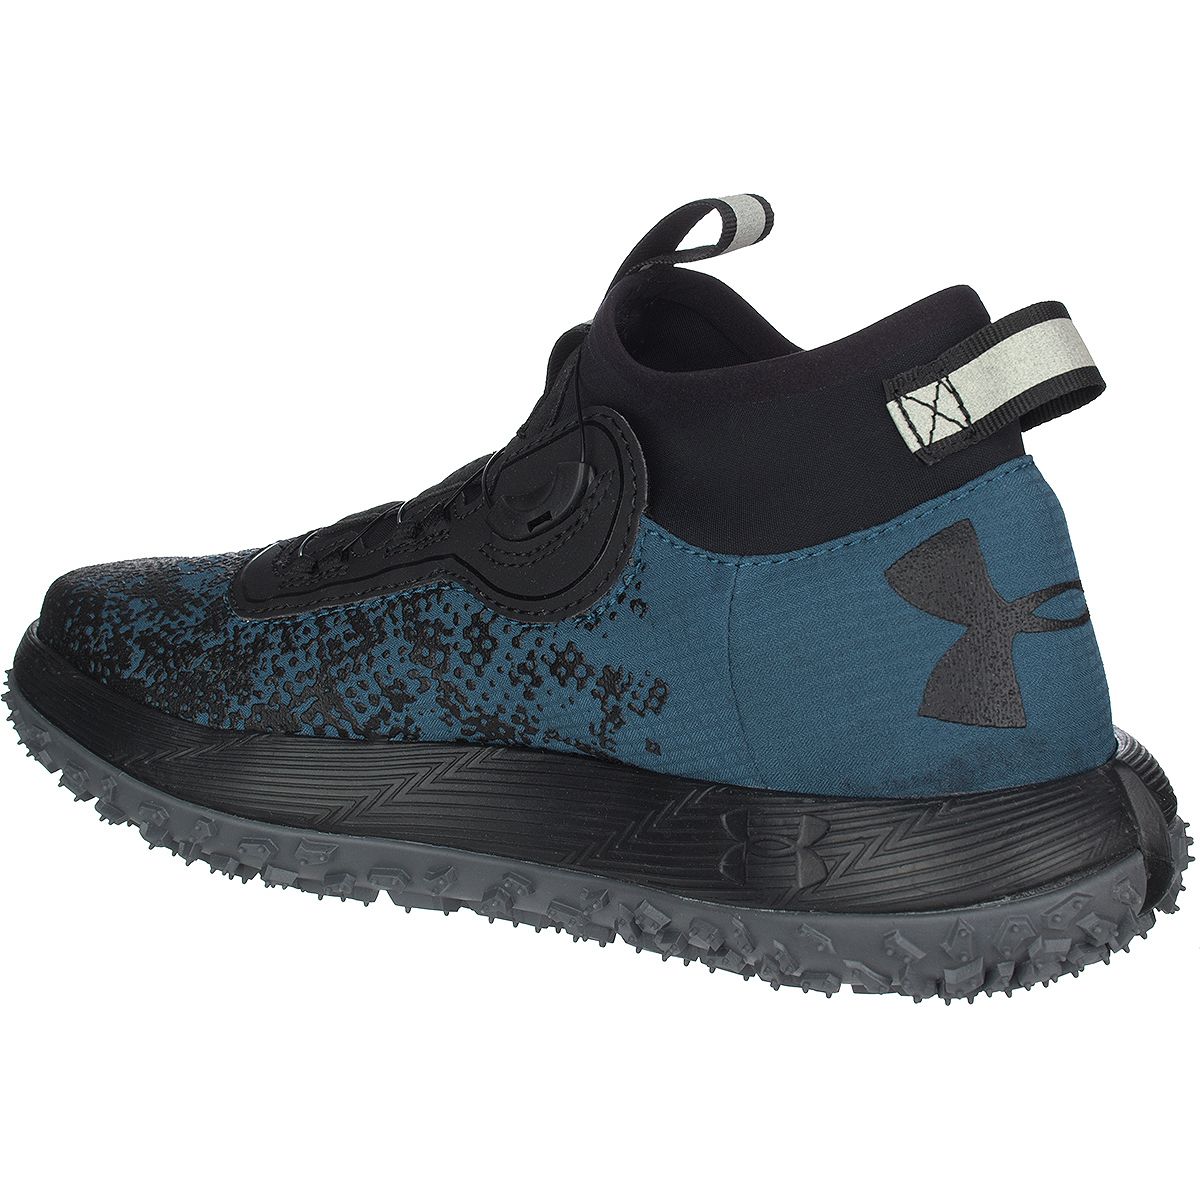 Under Armour Fat Tire 2 Trail Running Shoe - Men's | Competitive Cyclist